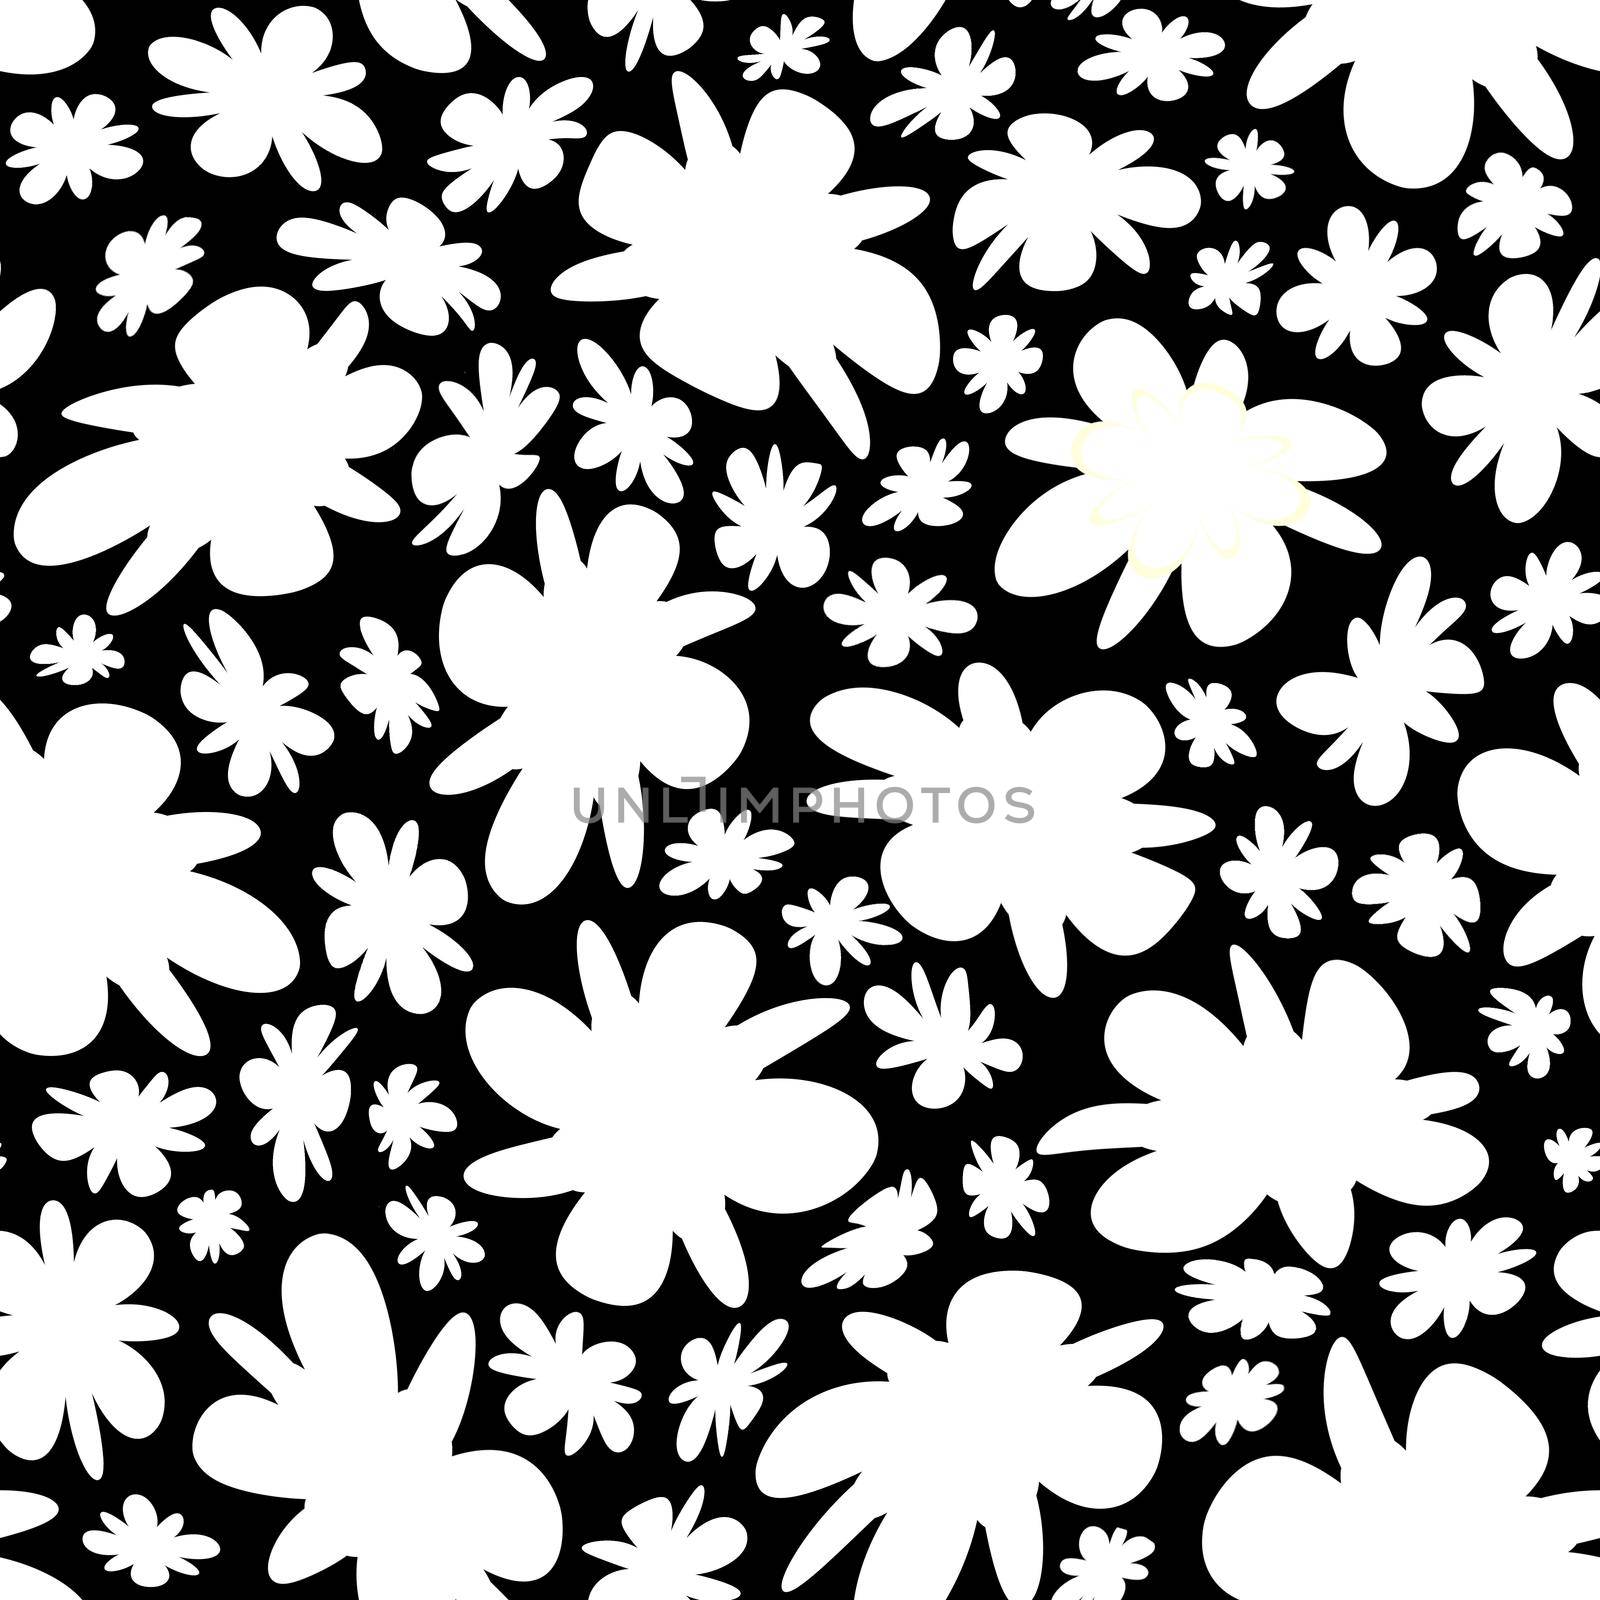 Trendy fabric seamless pattern miniature flowers by Angelsmoon